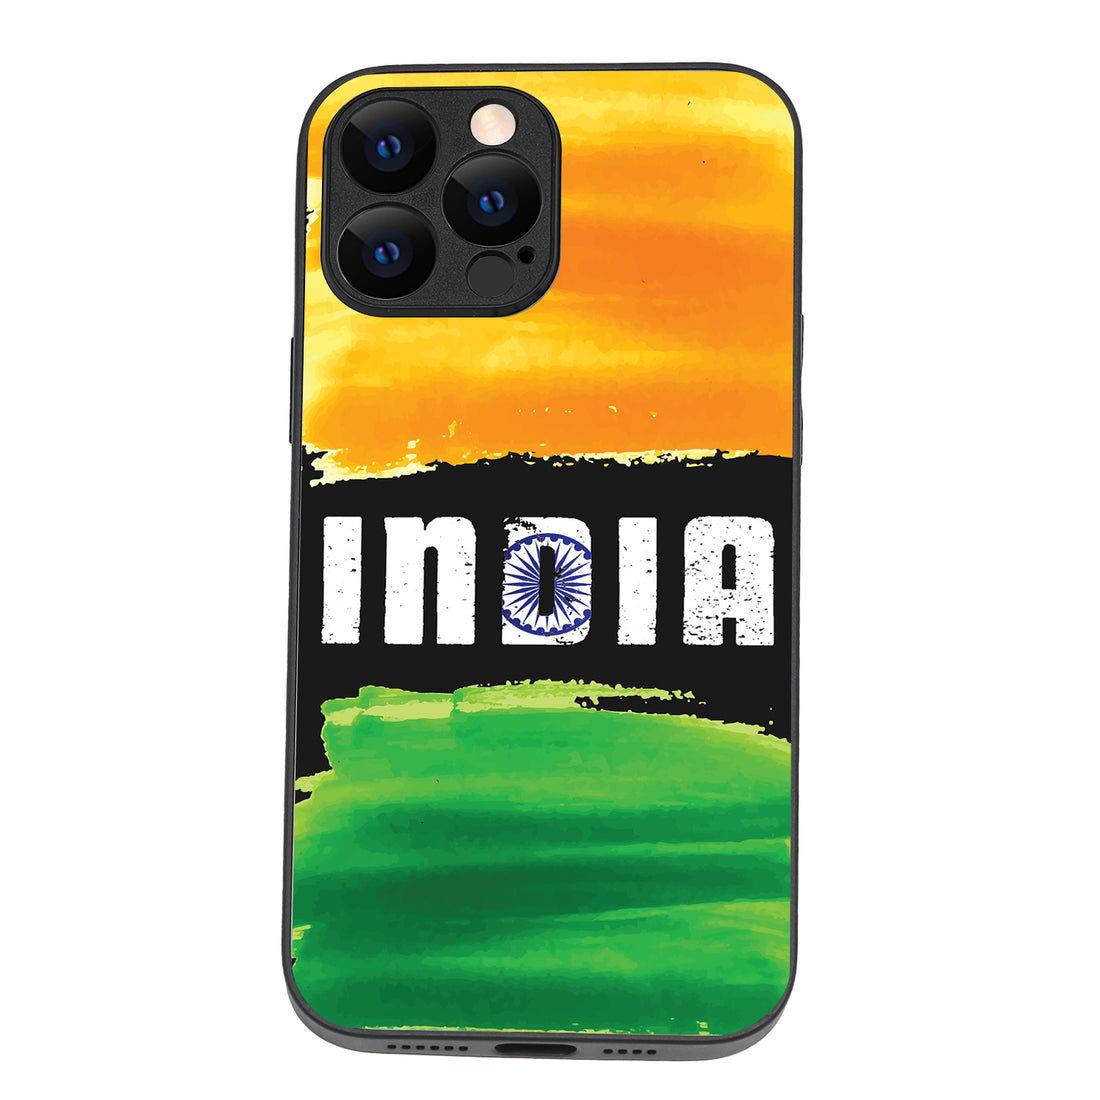 Indian Flag iPhone 13 Pro Max Case